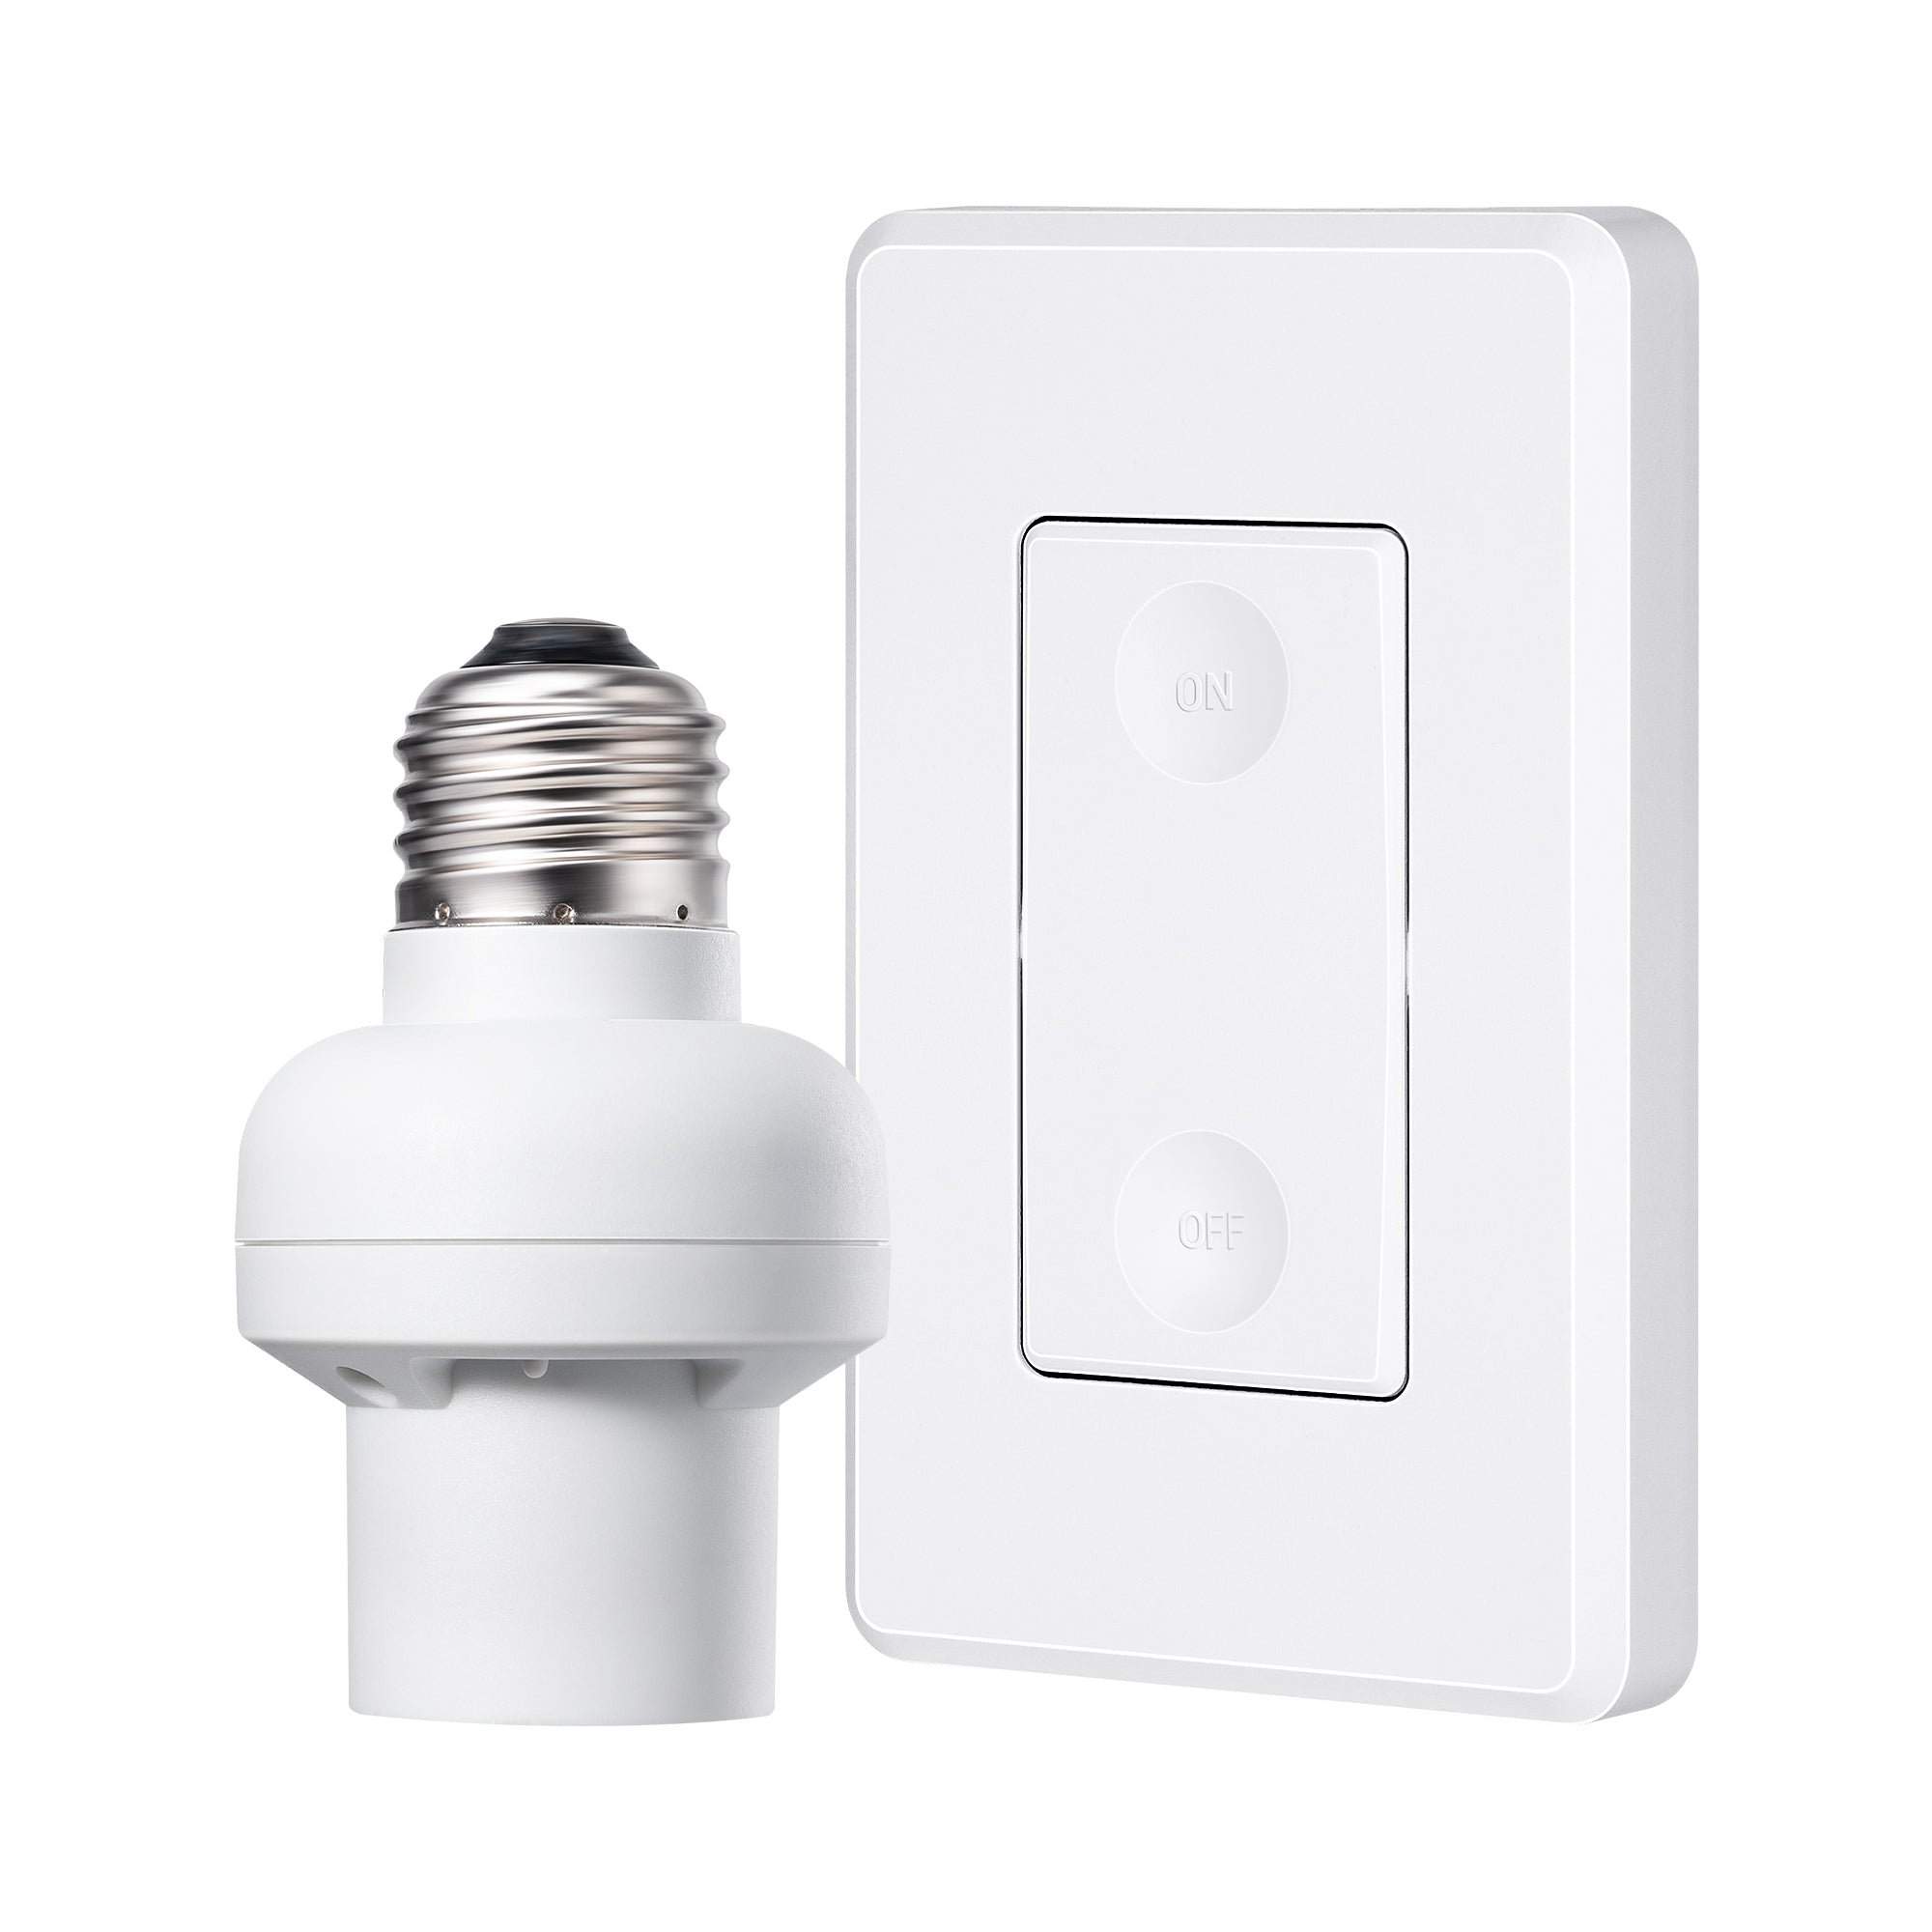 DEWENWILS Remote Control Lamp Light Bulb Socket E26/E27 Base for Pull Chain Light  Fixture, No Wiring, ETL Listed(1 Remote+3 Sockets) 